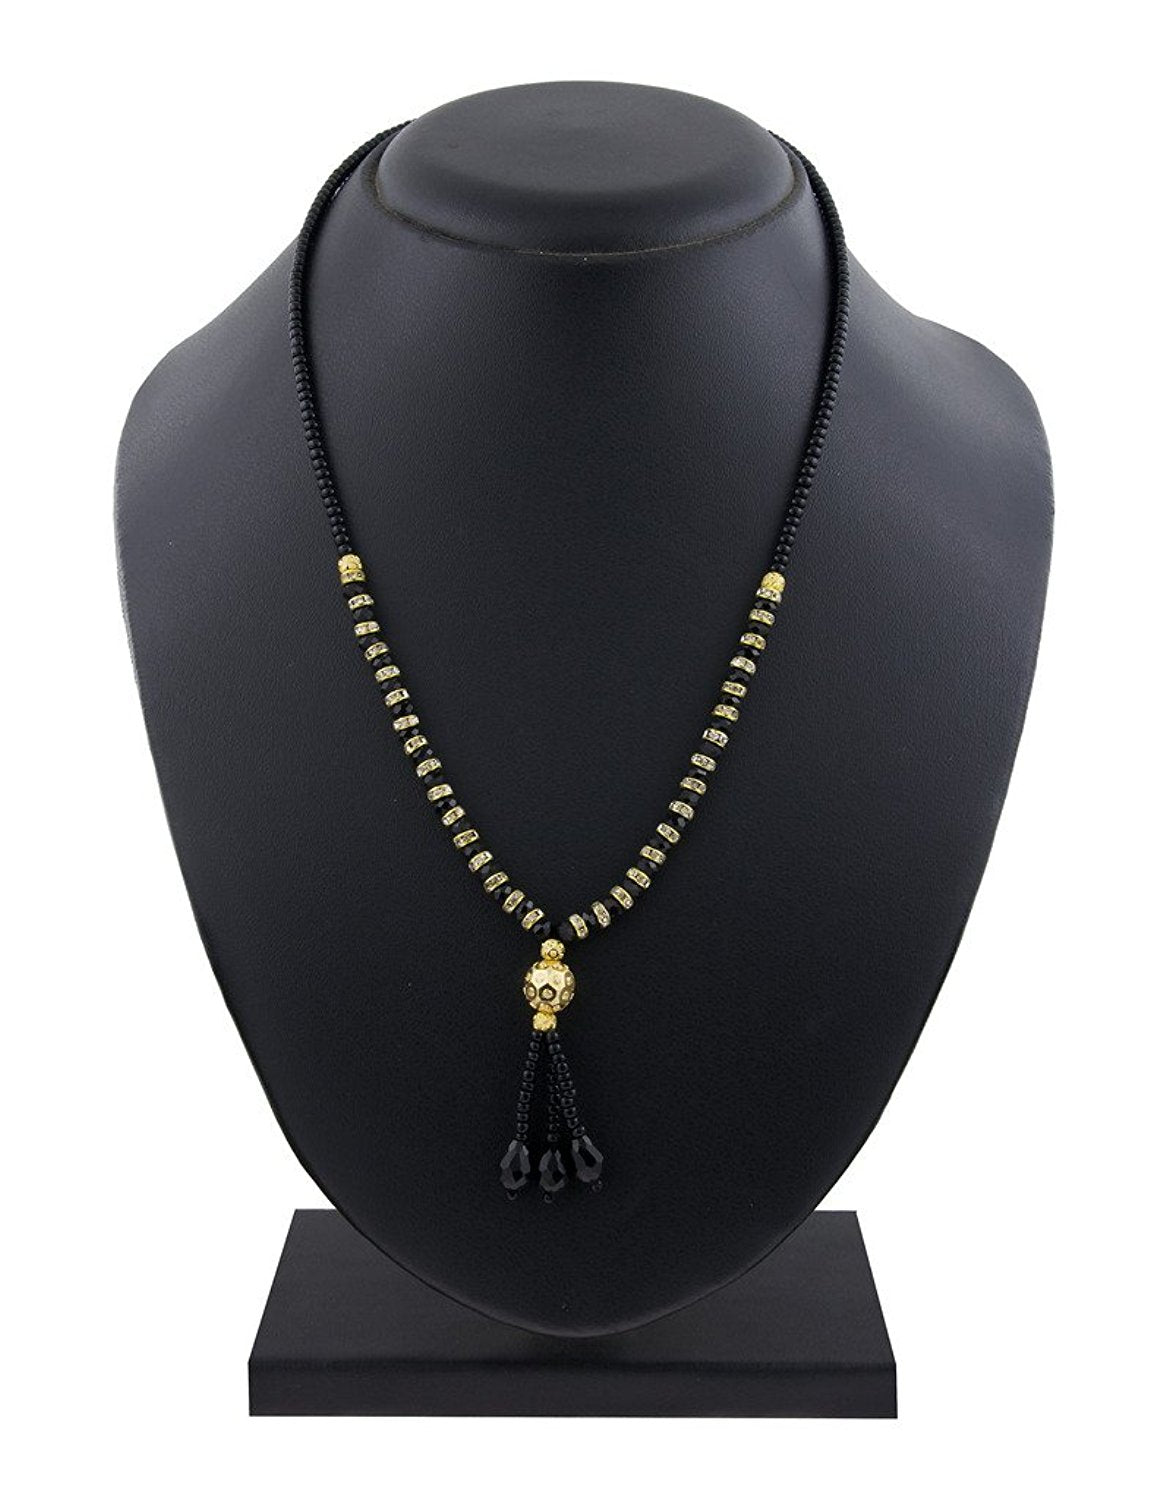 Traditional Indian Mangalsutra black beads necklace gift for wife – Karizma  Jewels